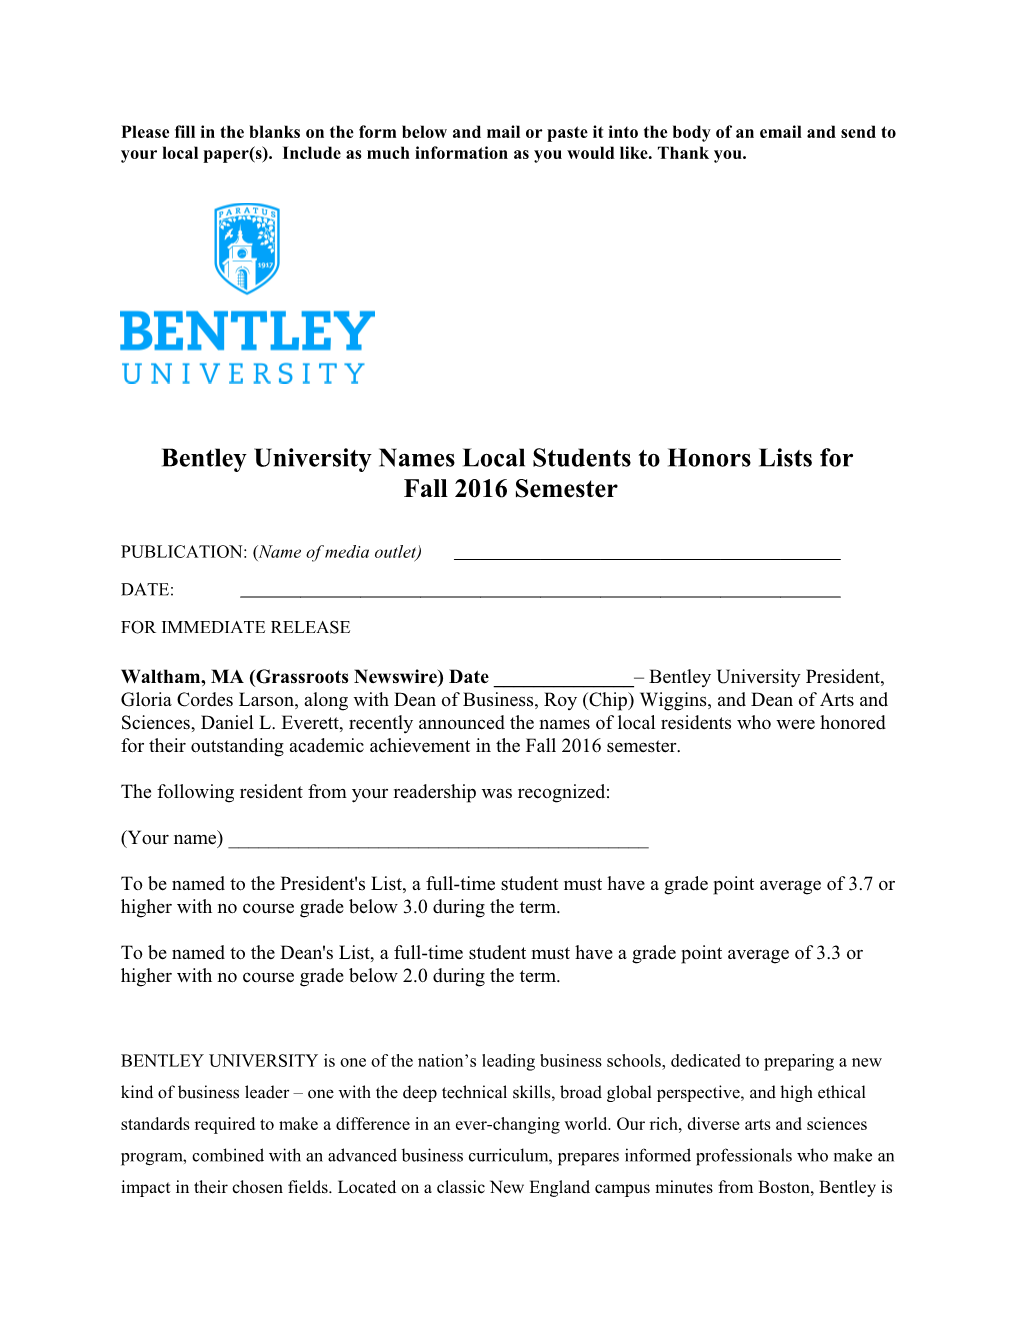 Bentley University Names Local Students to Honors Lists For